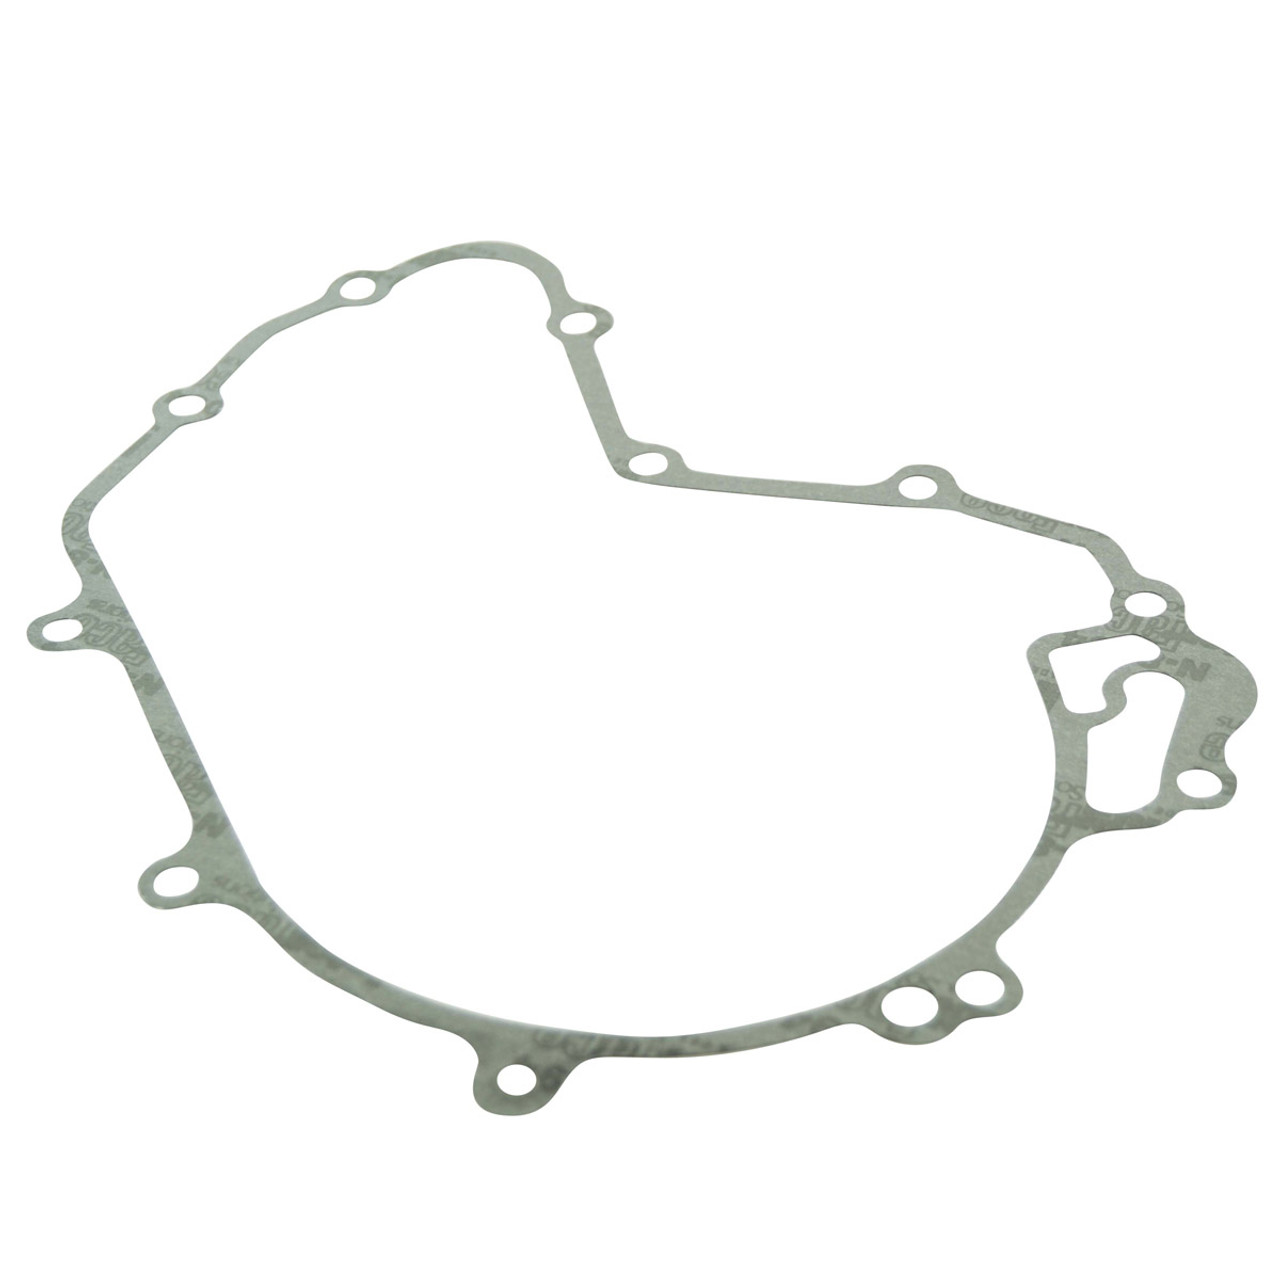 RMSTATOR New Aftermarket Can-am, Lynx, Ski-doo Stator Crankcase Cover Gasket, RM08029